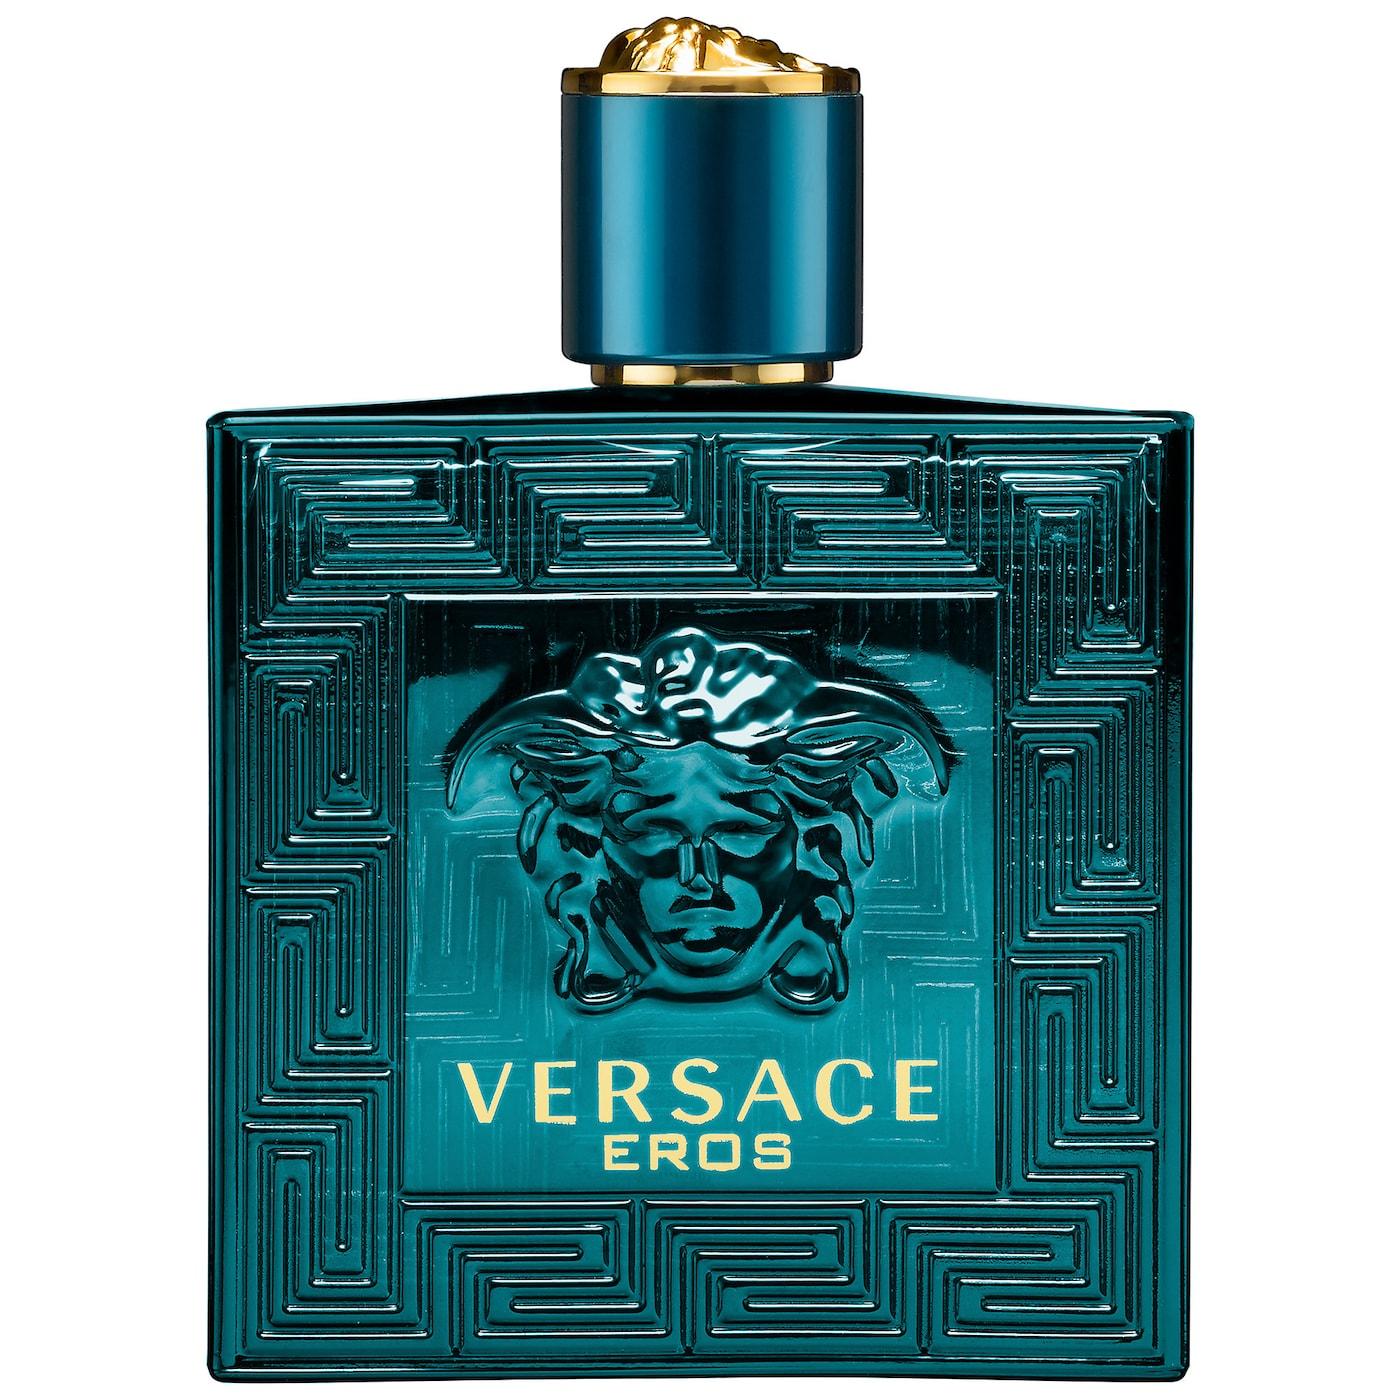 31 of the Best Colognes for Men to Try in 2023